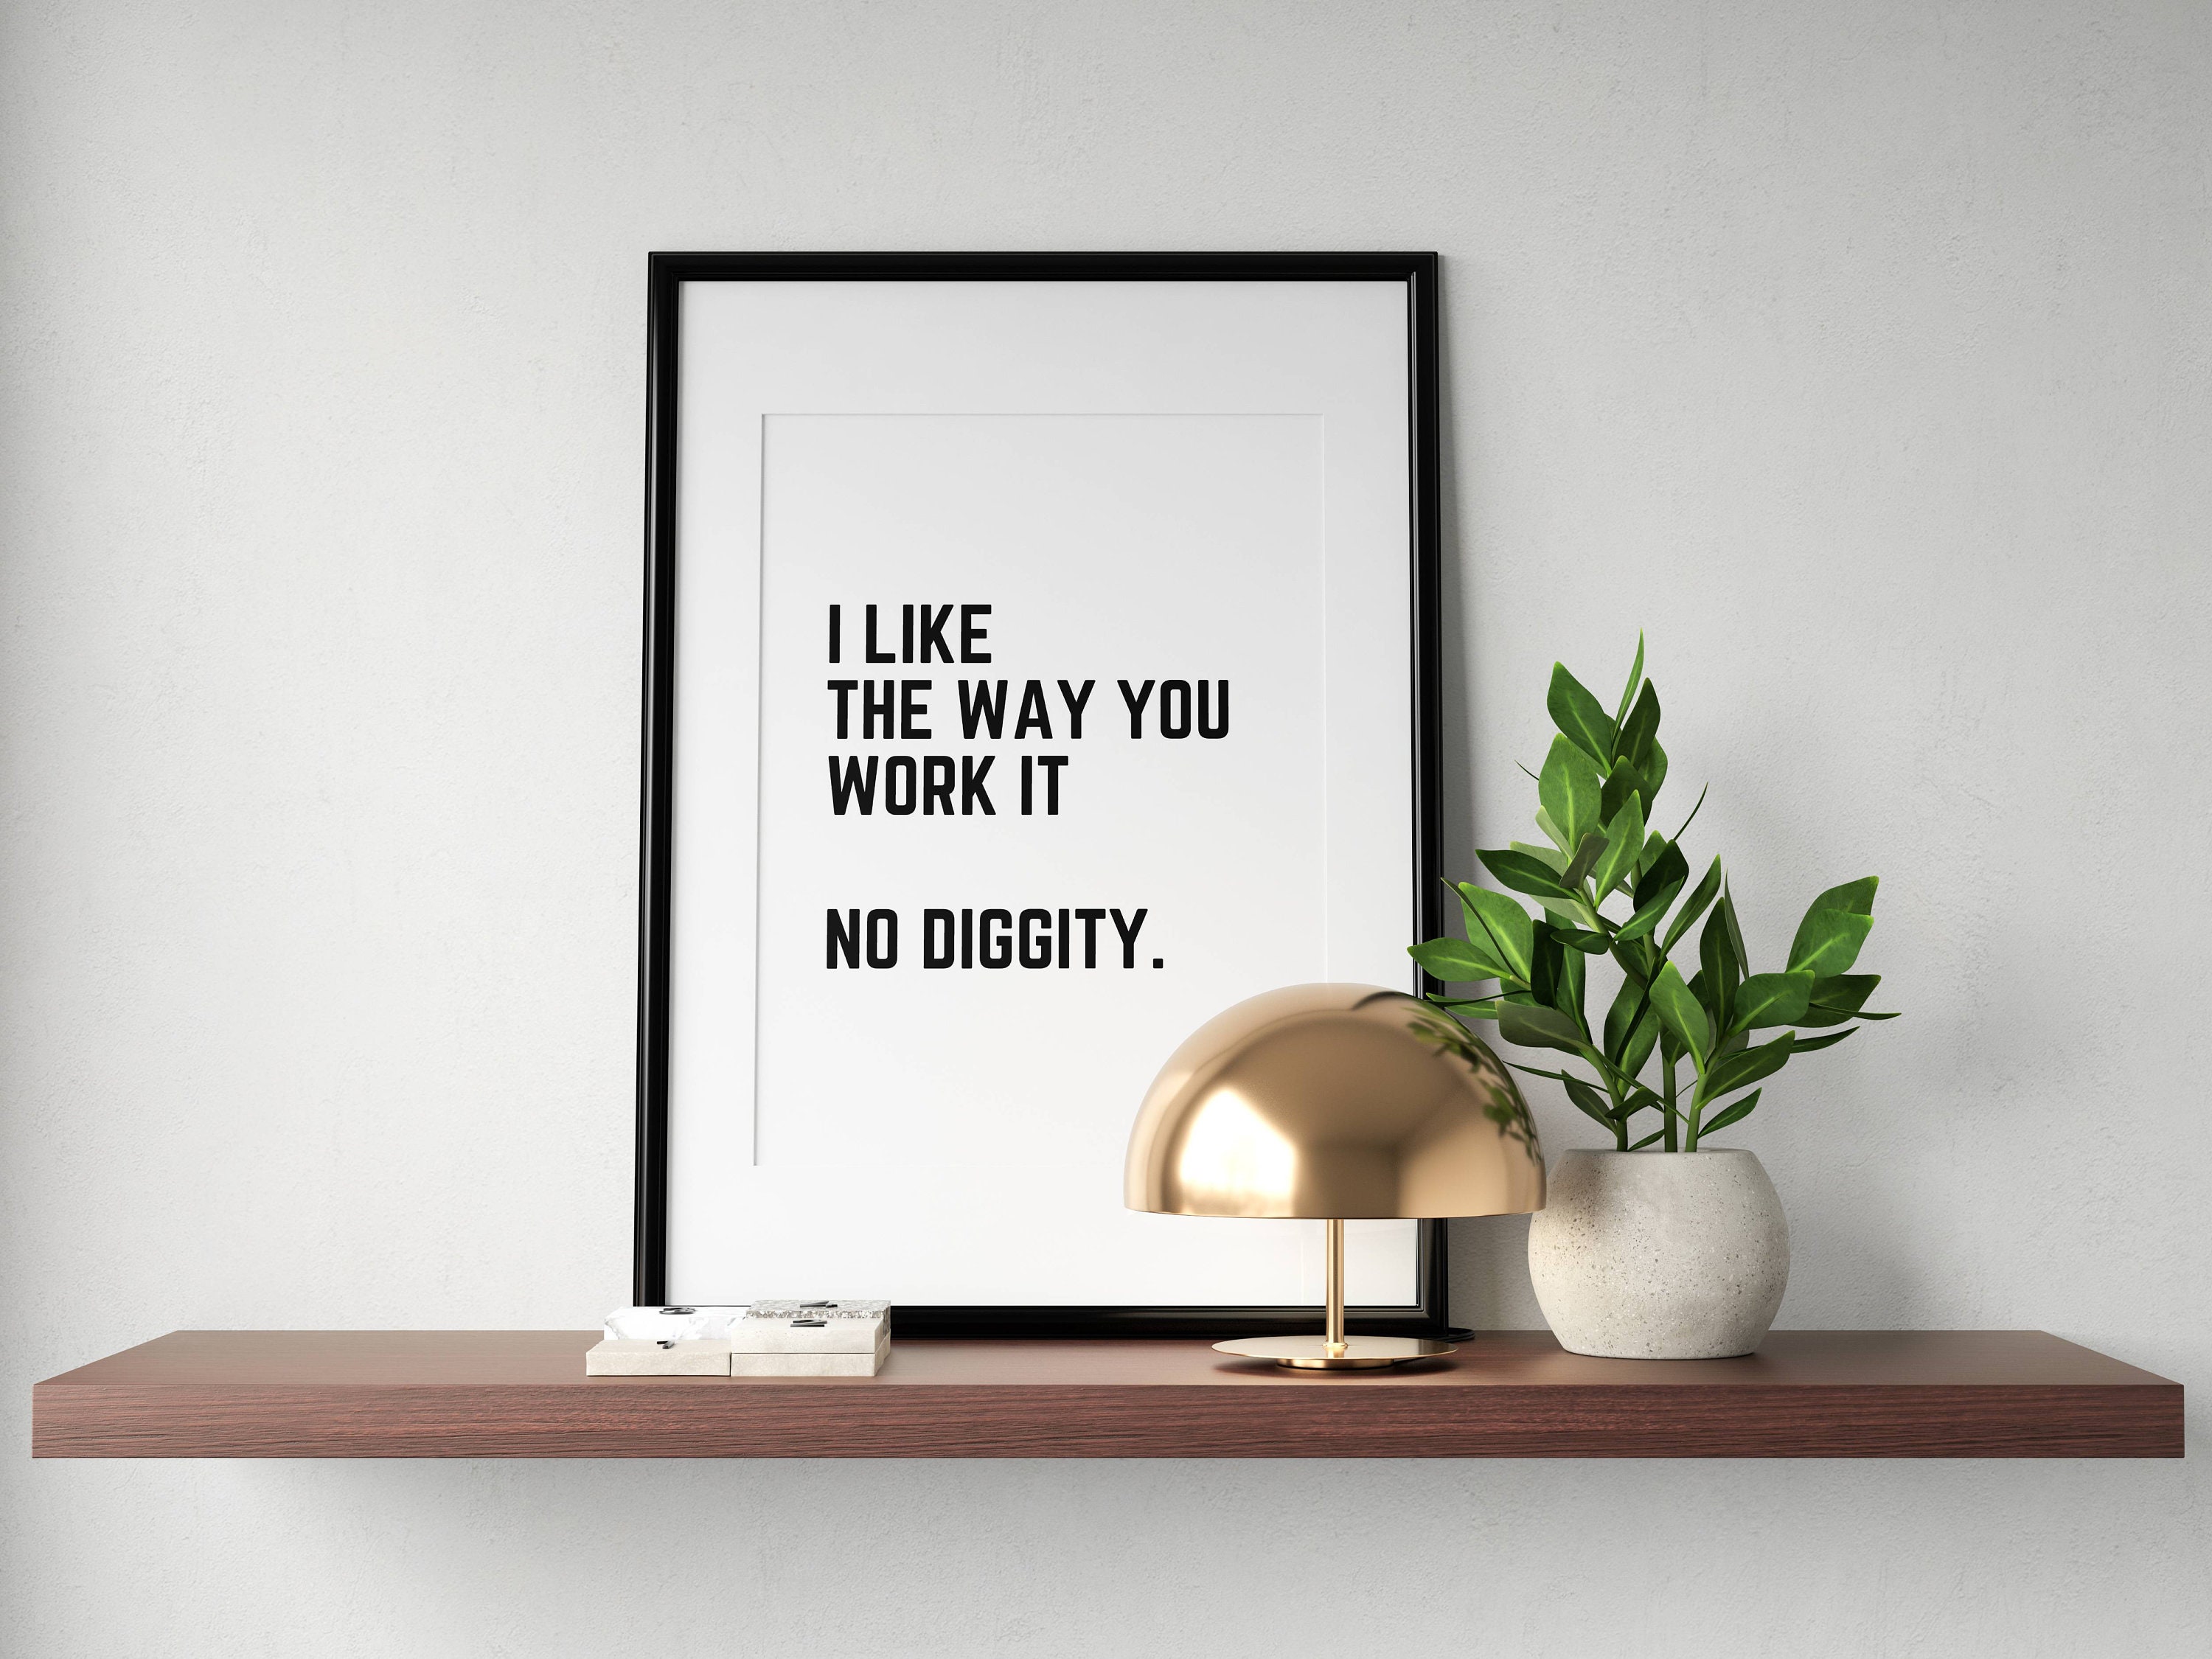  No Diggity Song Lyrics - Portrait Gallery Wrapped Framed Canvas  Prints - Home Decor Wall Art (16 x 24 x 1.5): Posters & Prints